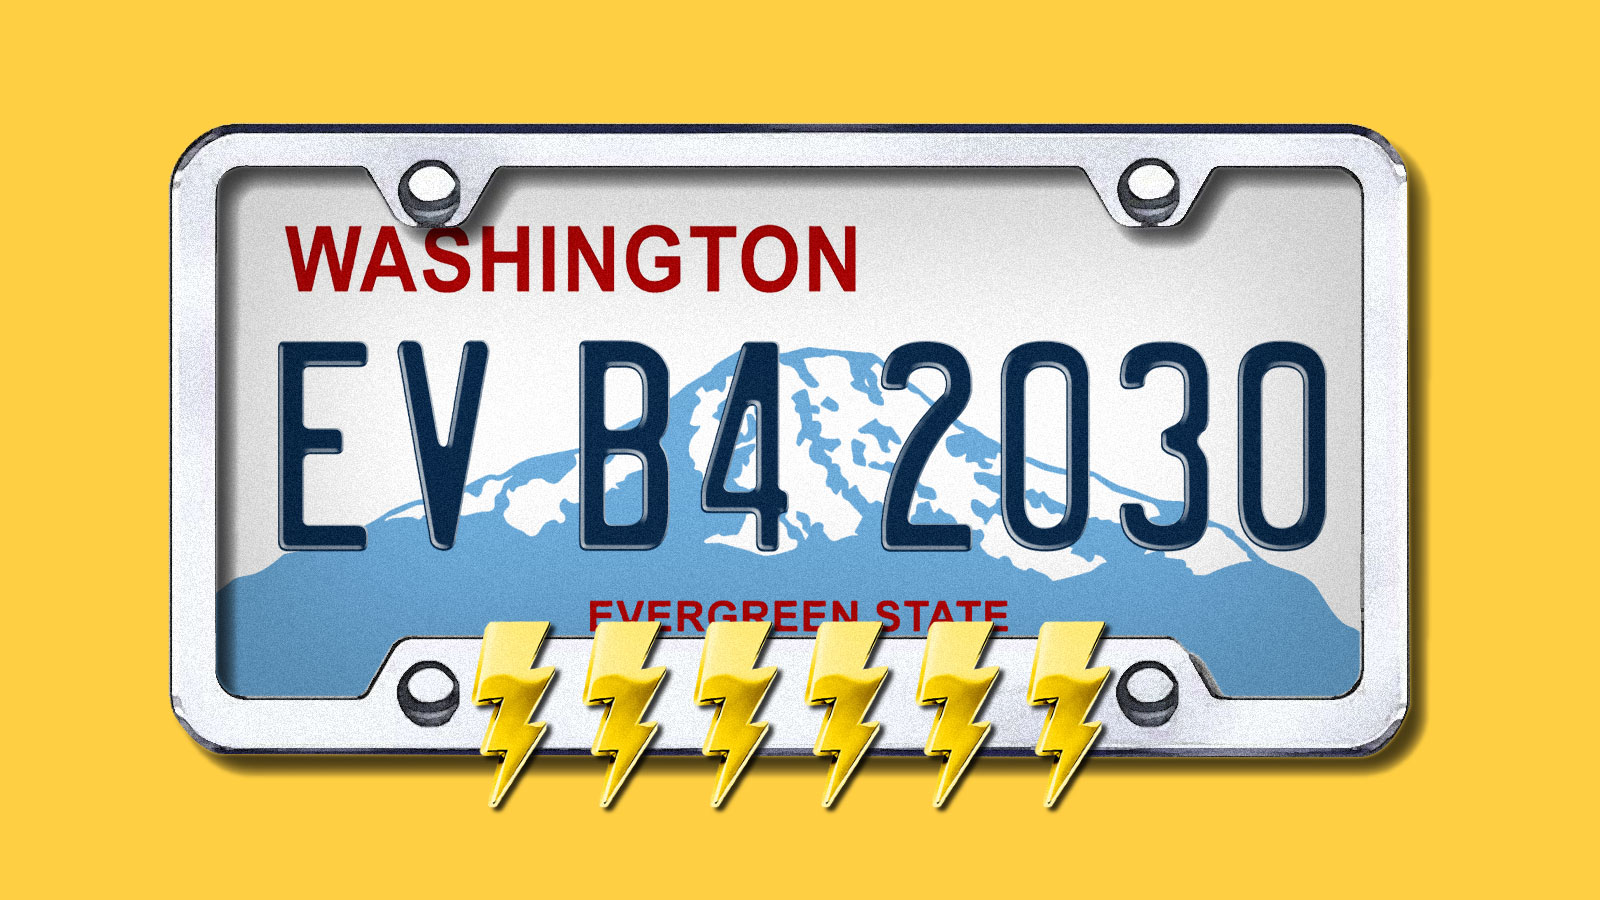 Washington state license plate with 